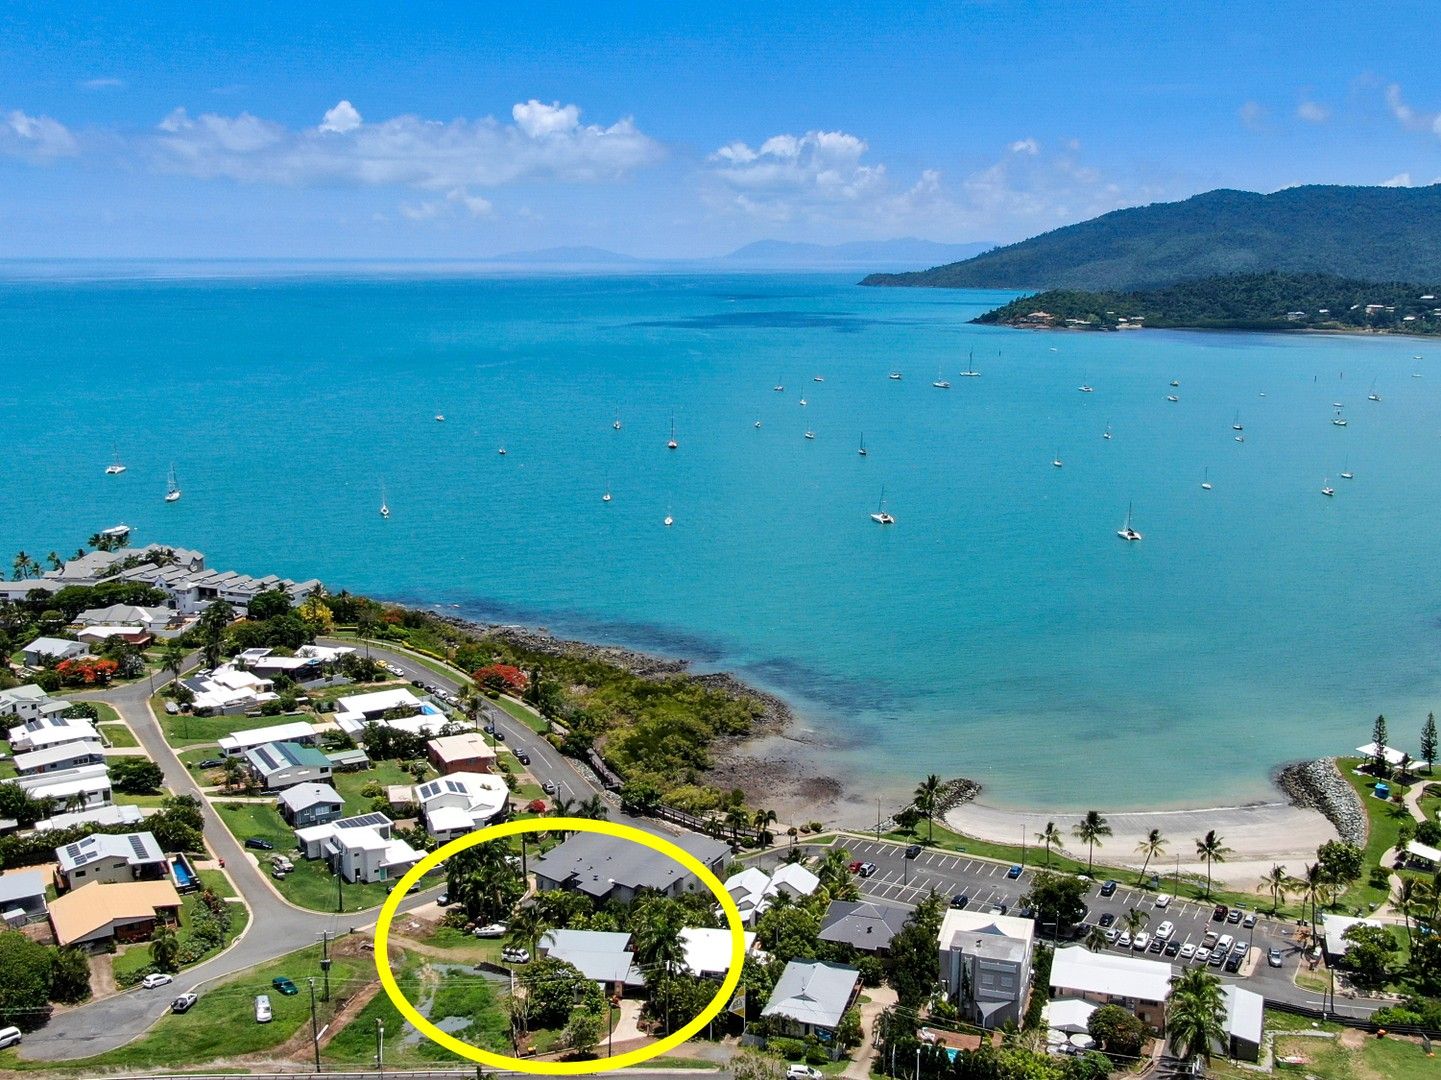 239 Shute Harbour Road, Airlie Beach QLD 4802, Image 1